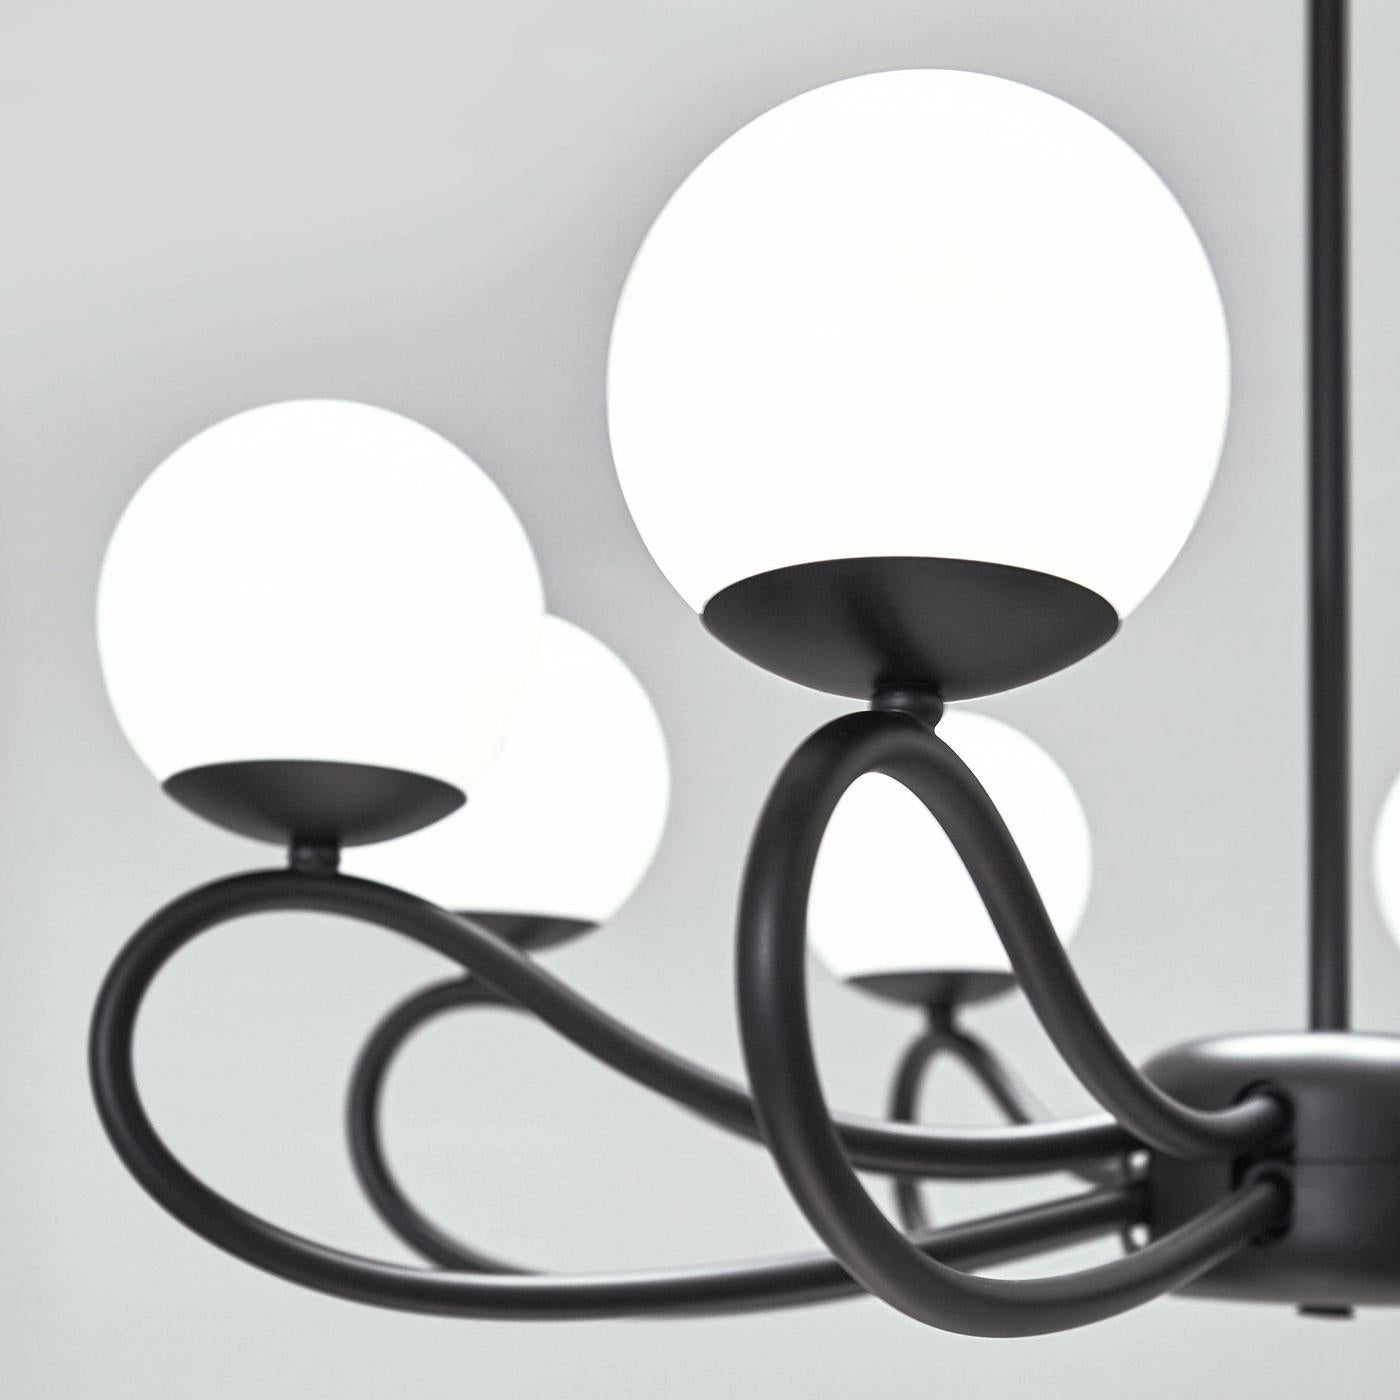 The fluid and artfully crafted metal tubes in this classy hanging light fixture are true to the name of the Papillon collection, which conjures up images of bowties. Designed by Matteo Zorzenoni, the metal elements are in a black matte finish, while